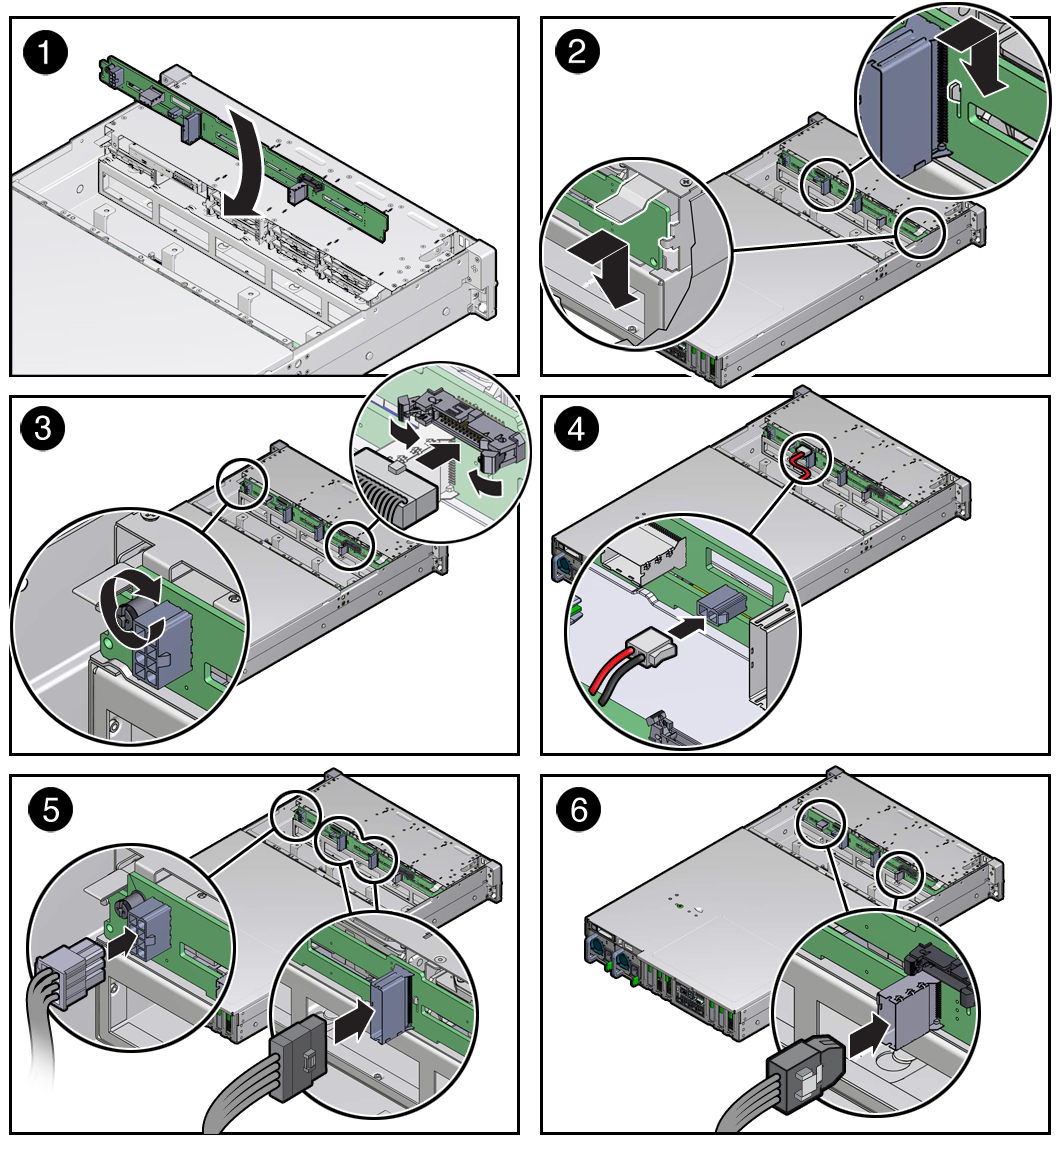 image:Figure showing how to install the drive backplane.